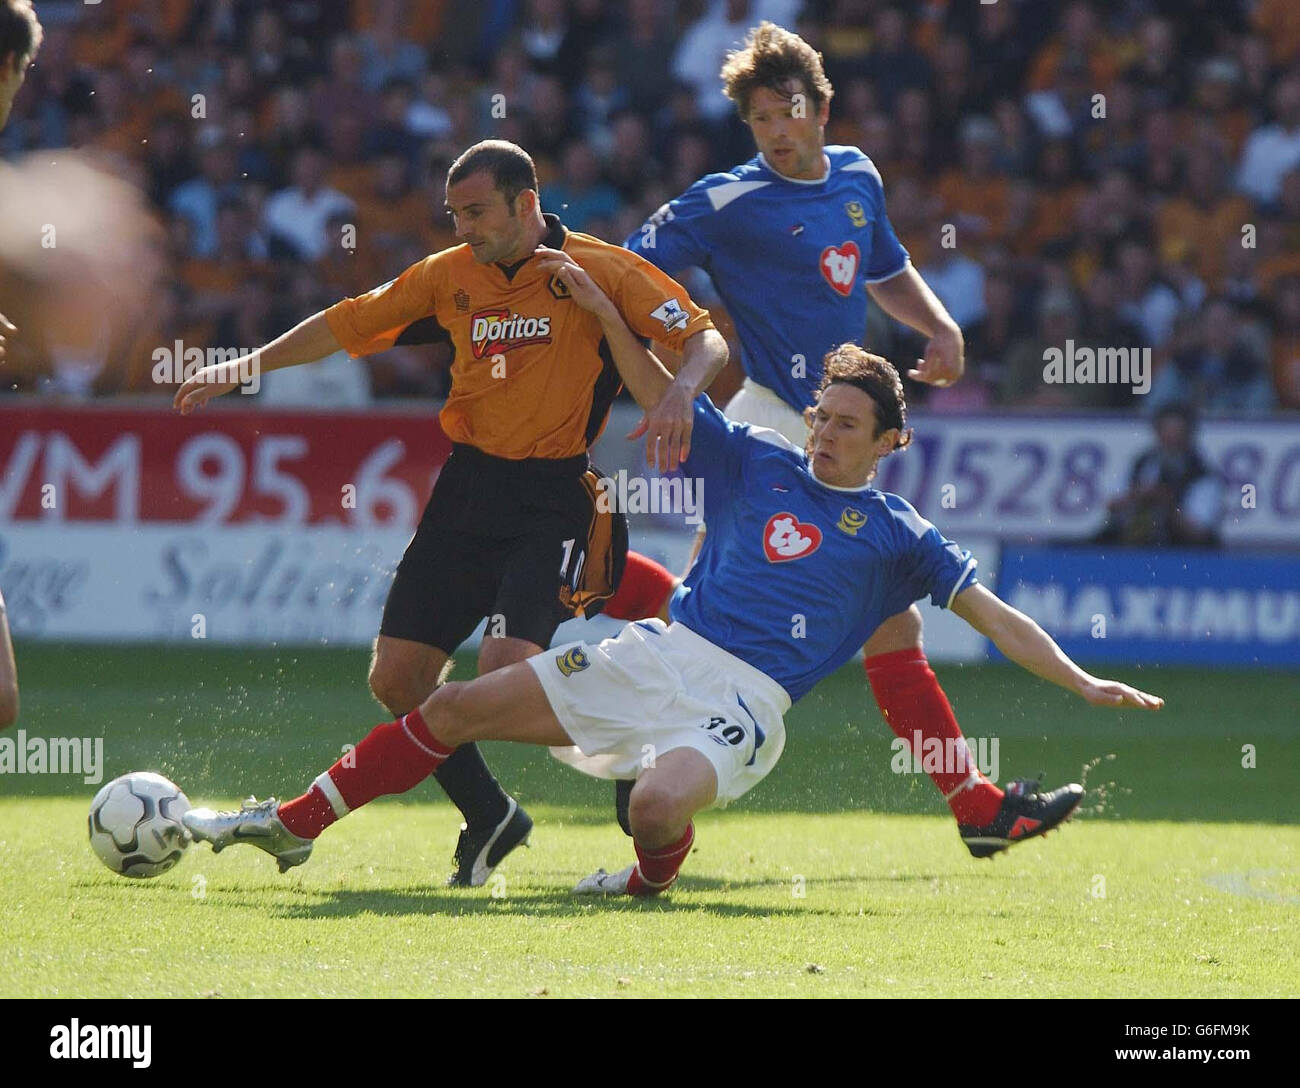 Portsmouth's Alex Smertin (centre) slides in on Colin Cameron of Wolverhampton Wanderers, during their FA Premiership match at Wolves' Molineux ground. Final score: Wolverhampton Wanderers nil, Portsmouth nil. Stock Photo